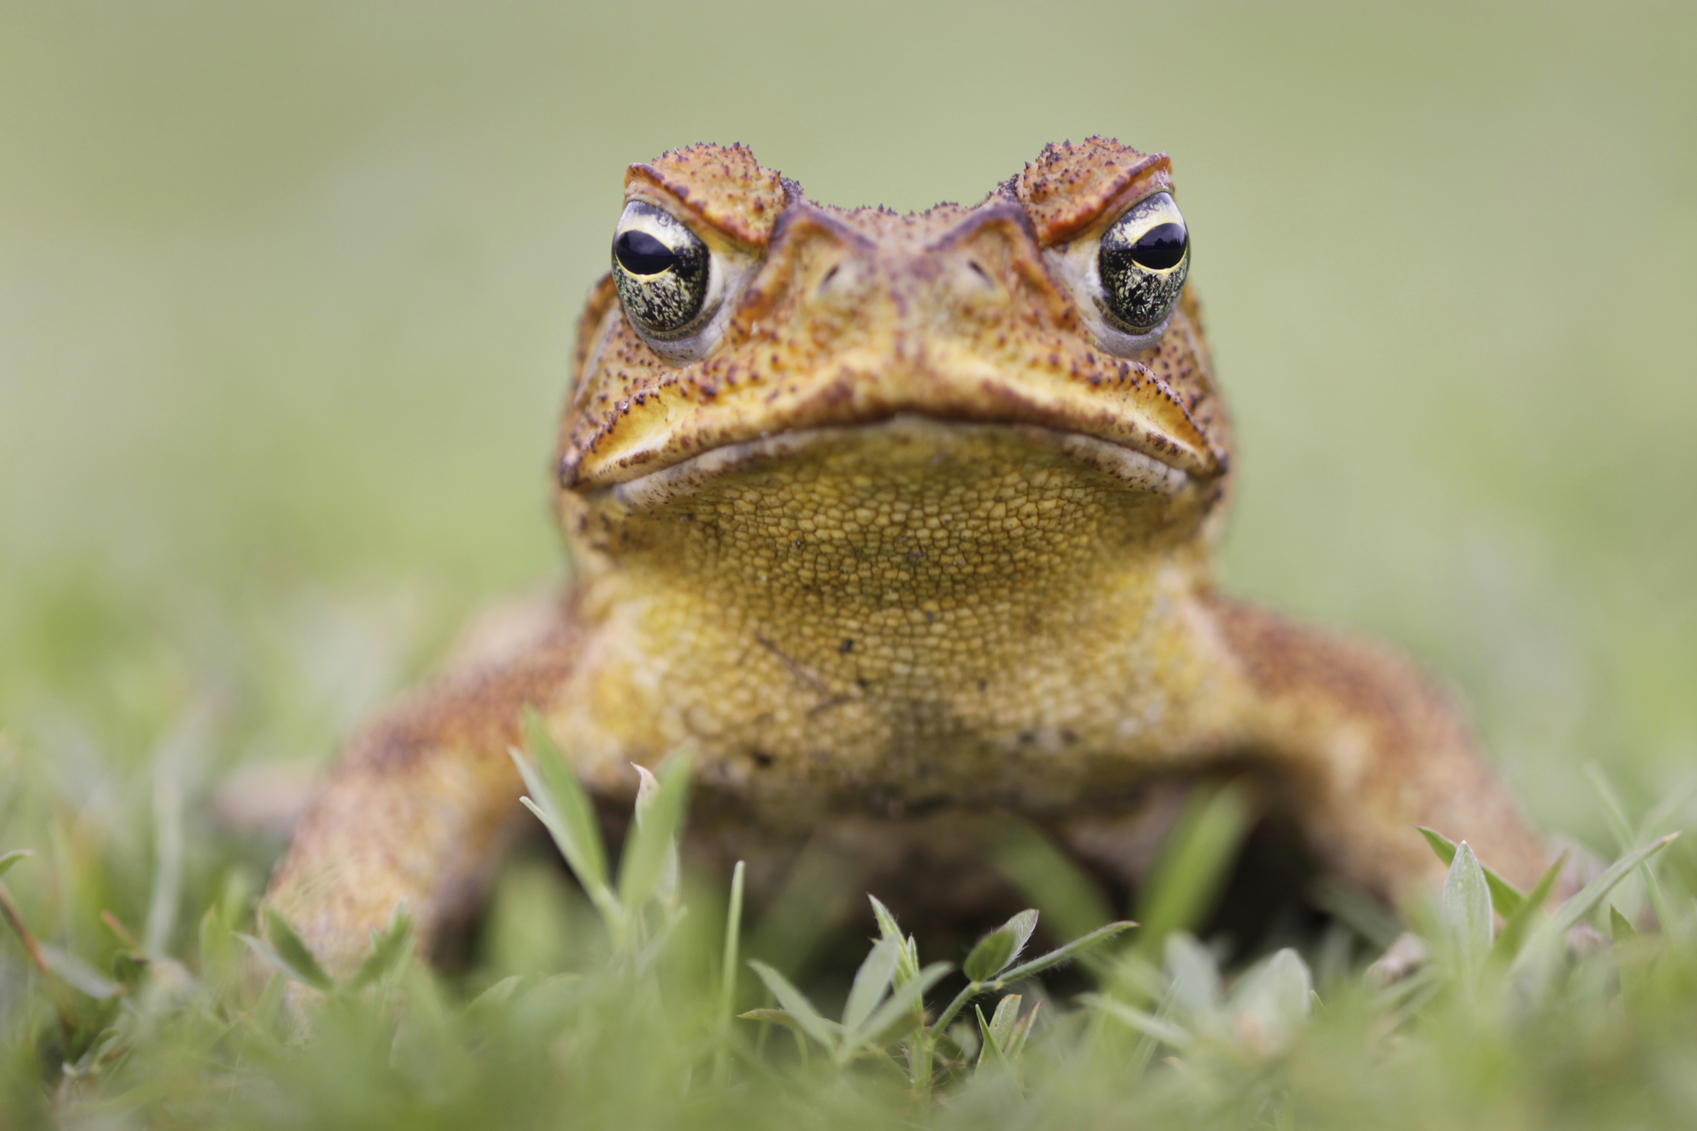 Queenslanders To Battle Cane Toads Uq News The University Of